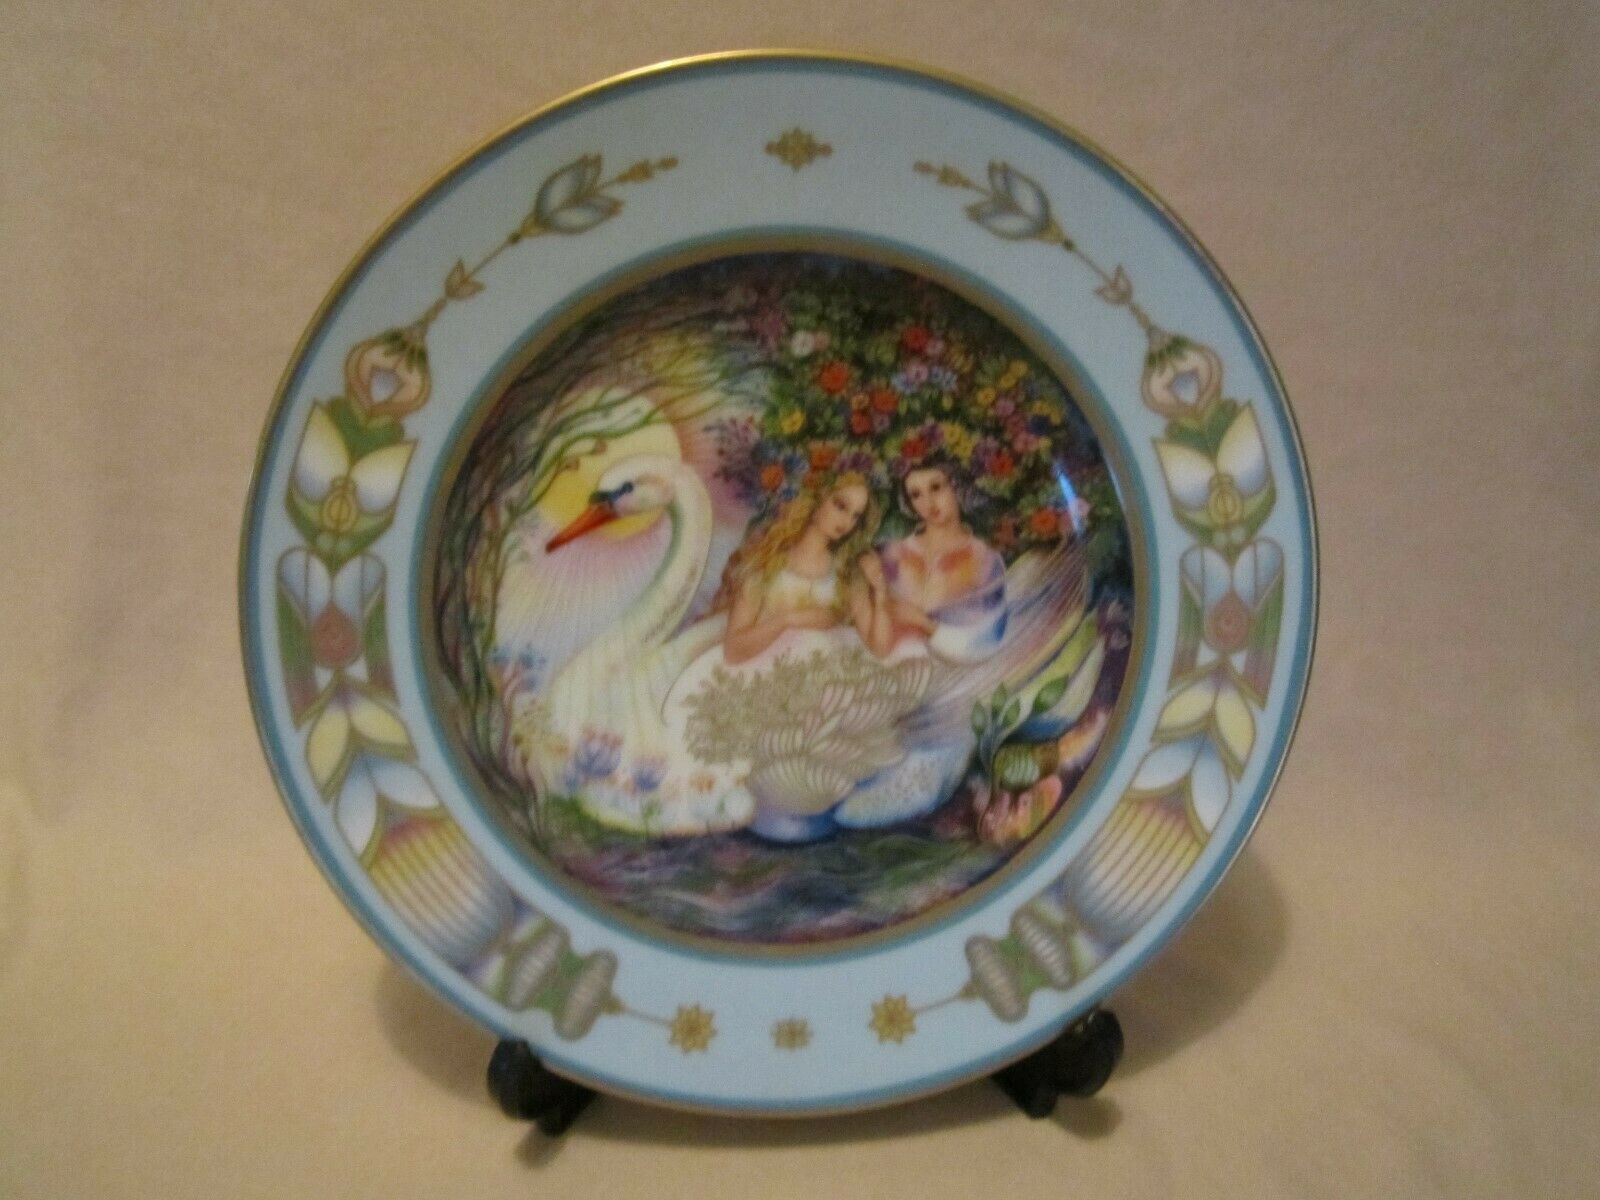 Katharina Receives A Promise of Love collector plate VILLEROY AND BOCH  G Trauth - $24.99